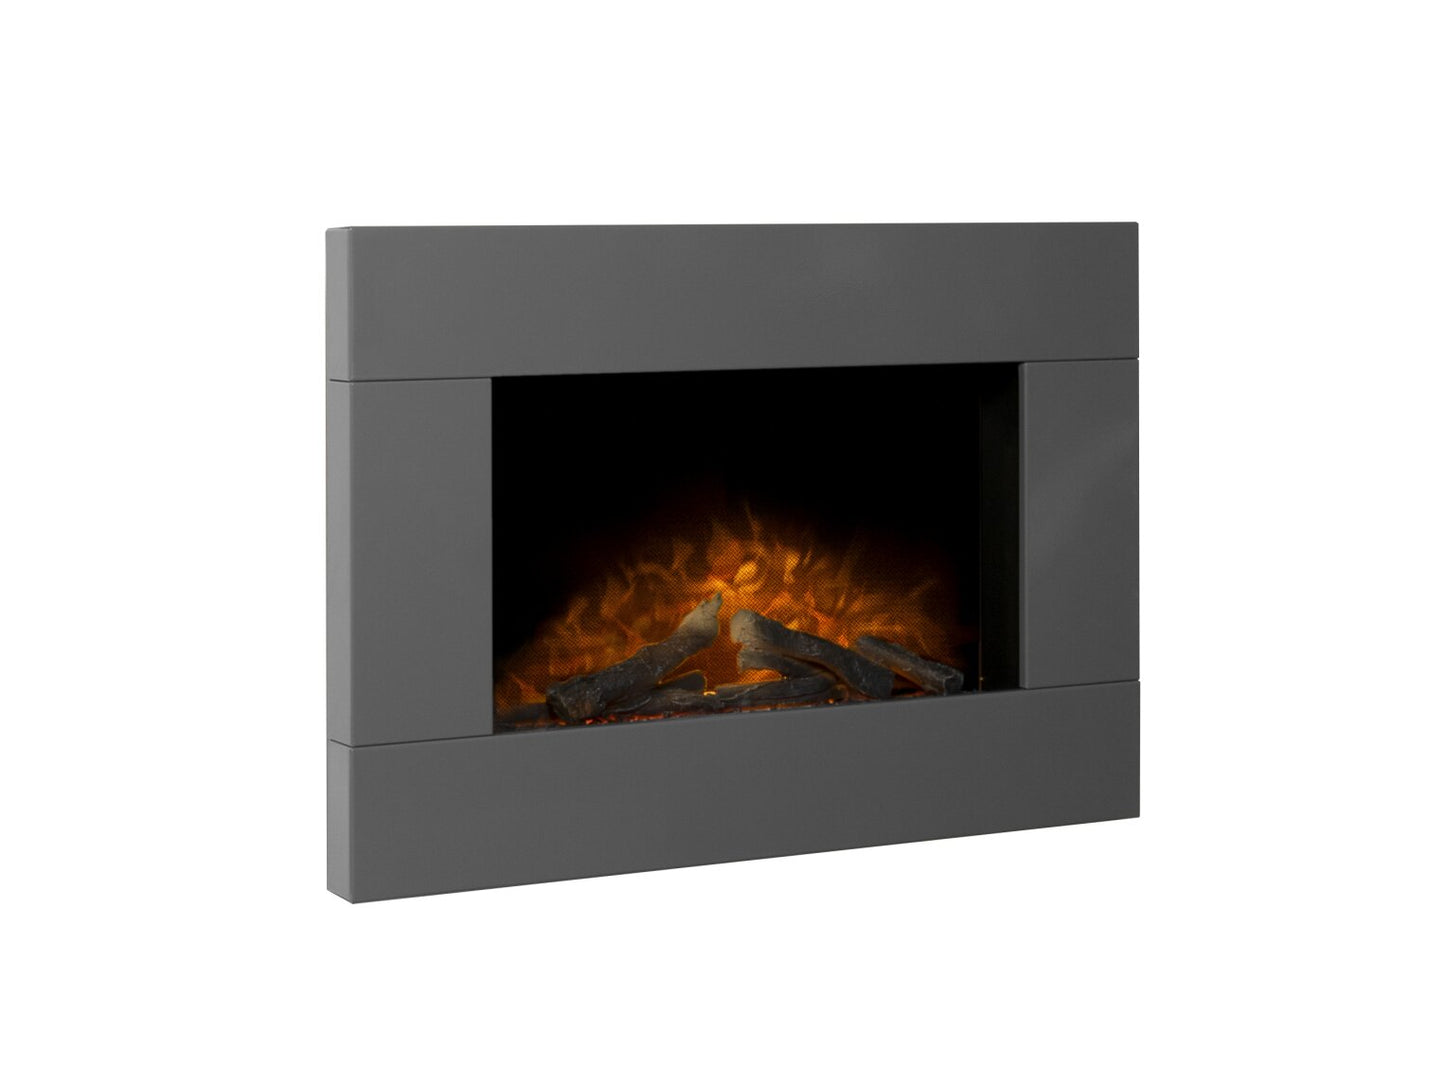 Adam Carina Electric Wall Mounted Fire with Logs & Remote Control in 32 inch 22615 Satin Grey